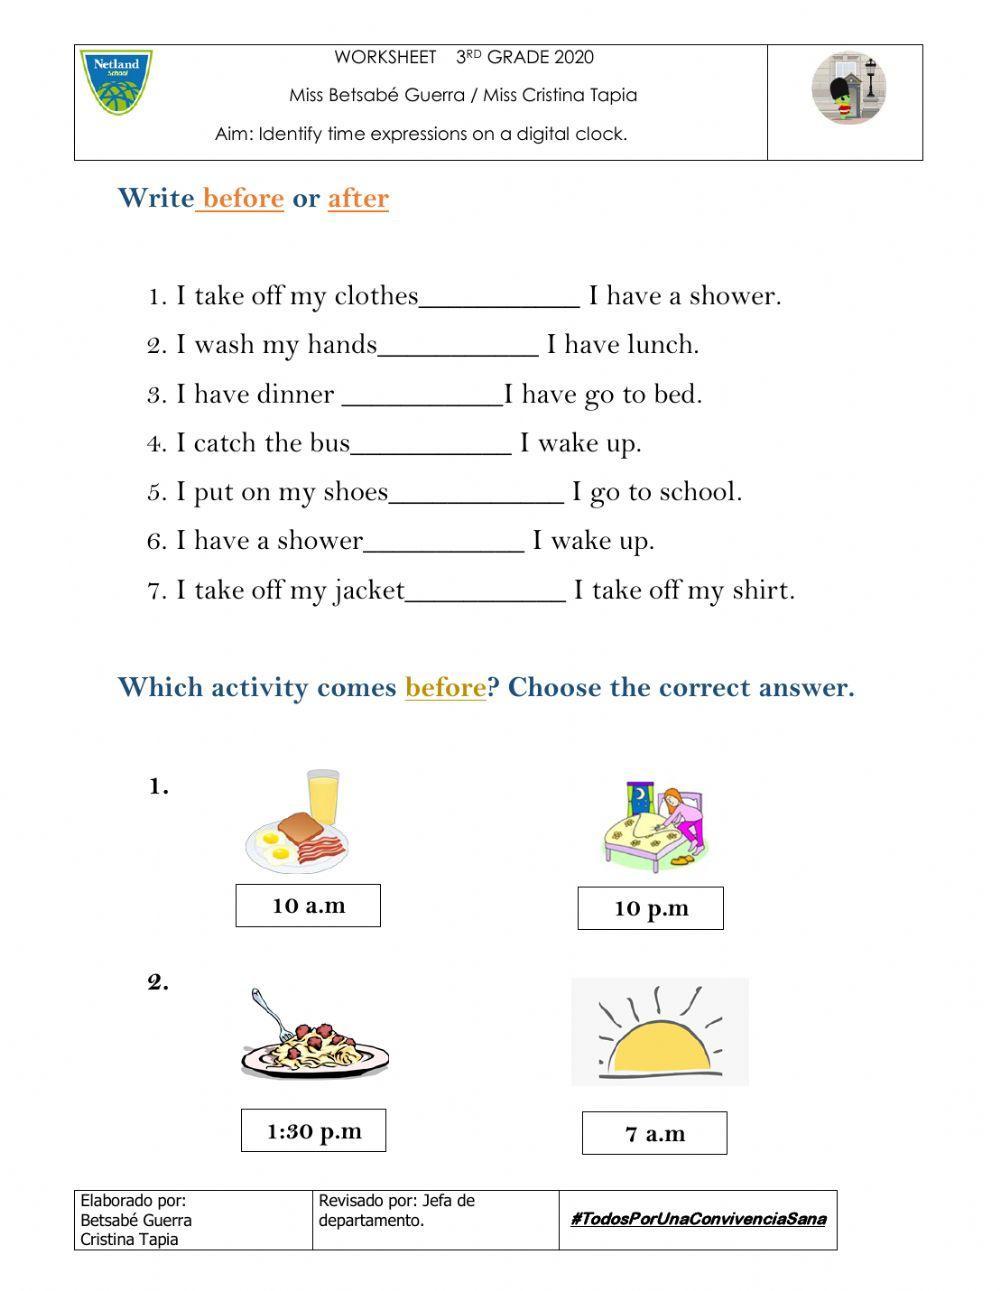 A day in the life worksheet II